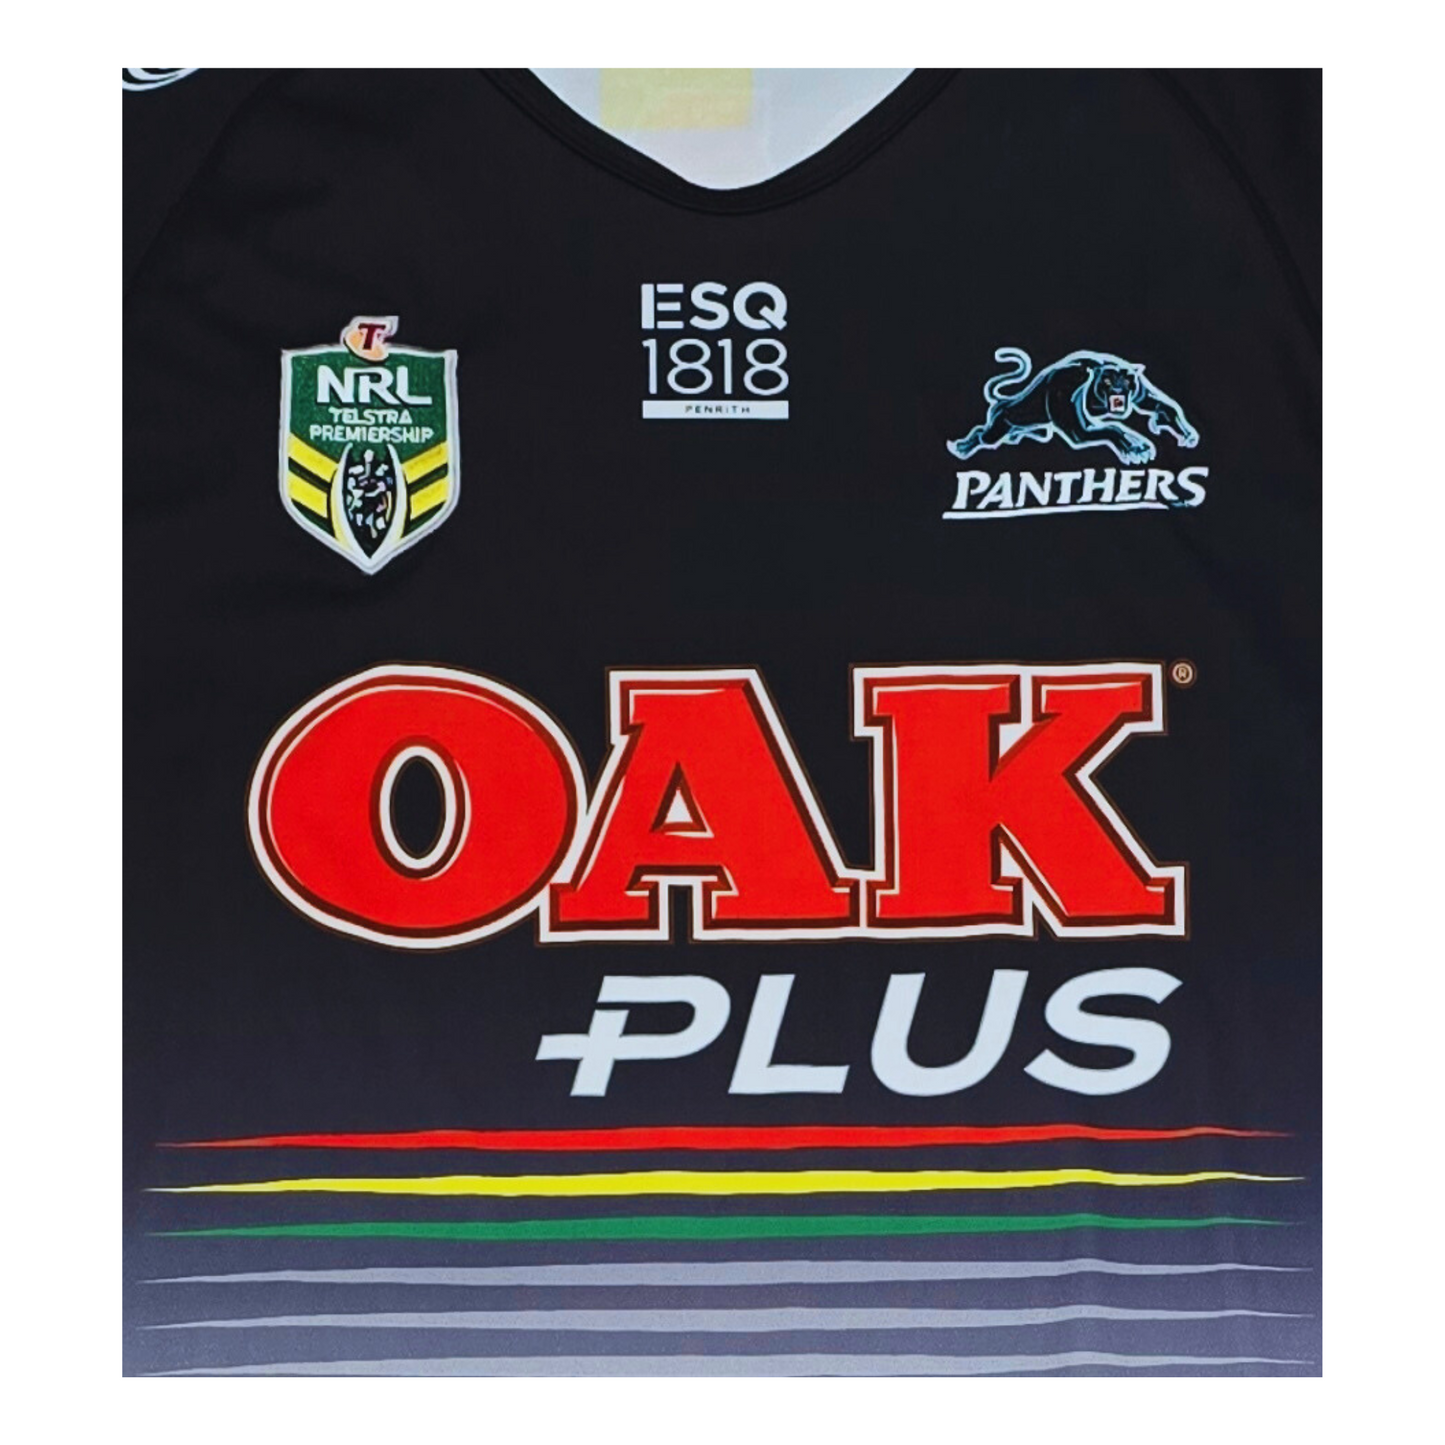 Penrith Panthers 2018 Home Jersey